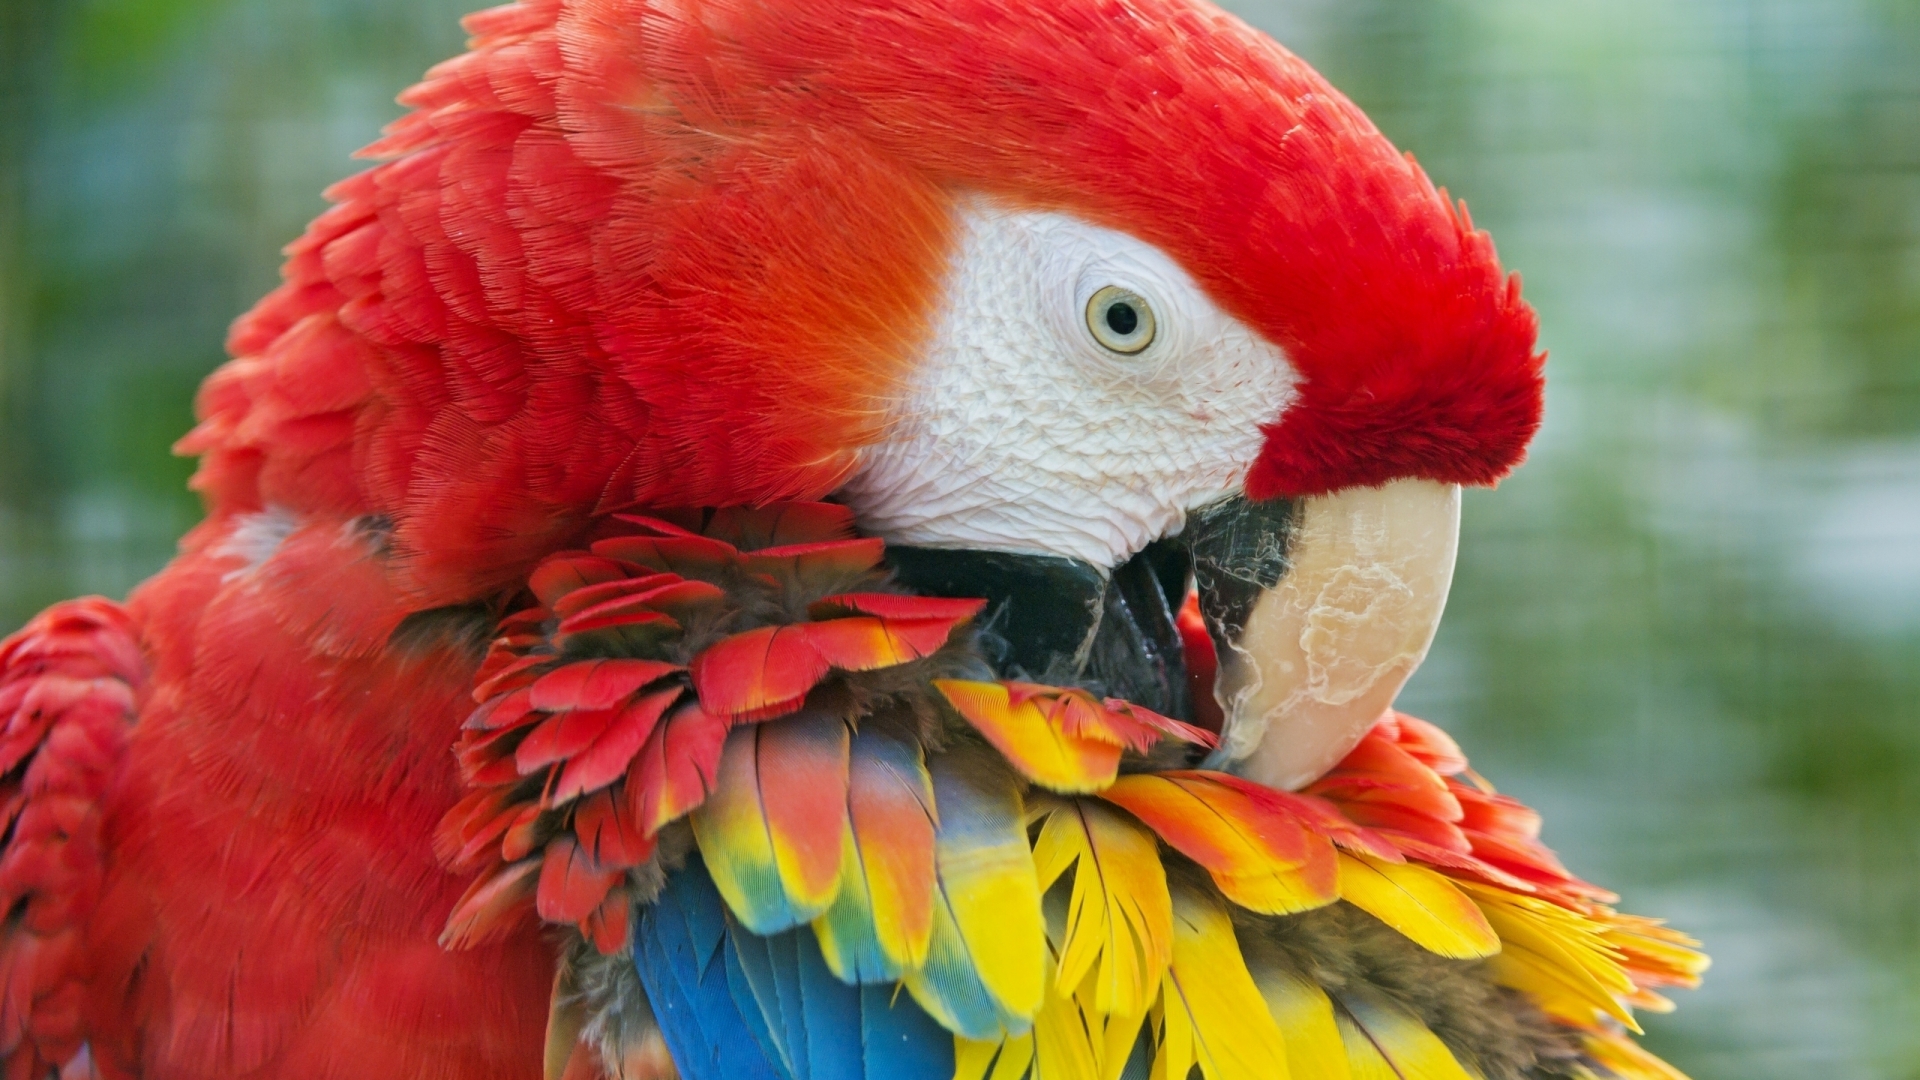 Beauty Red Parrot for 1920 x 1080 HDTV 1080p resolution